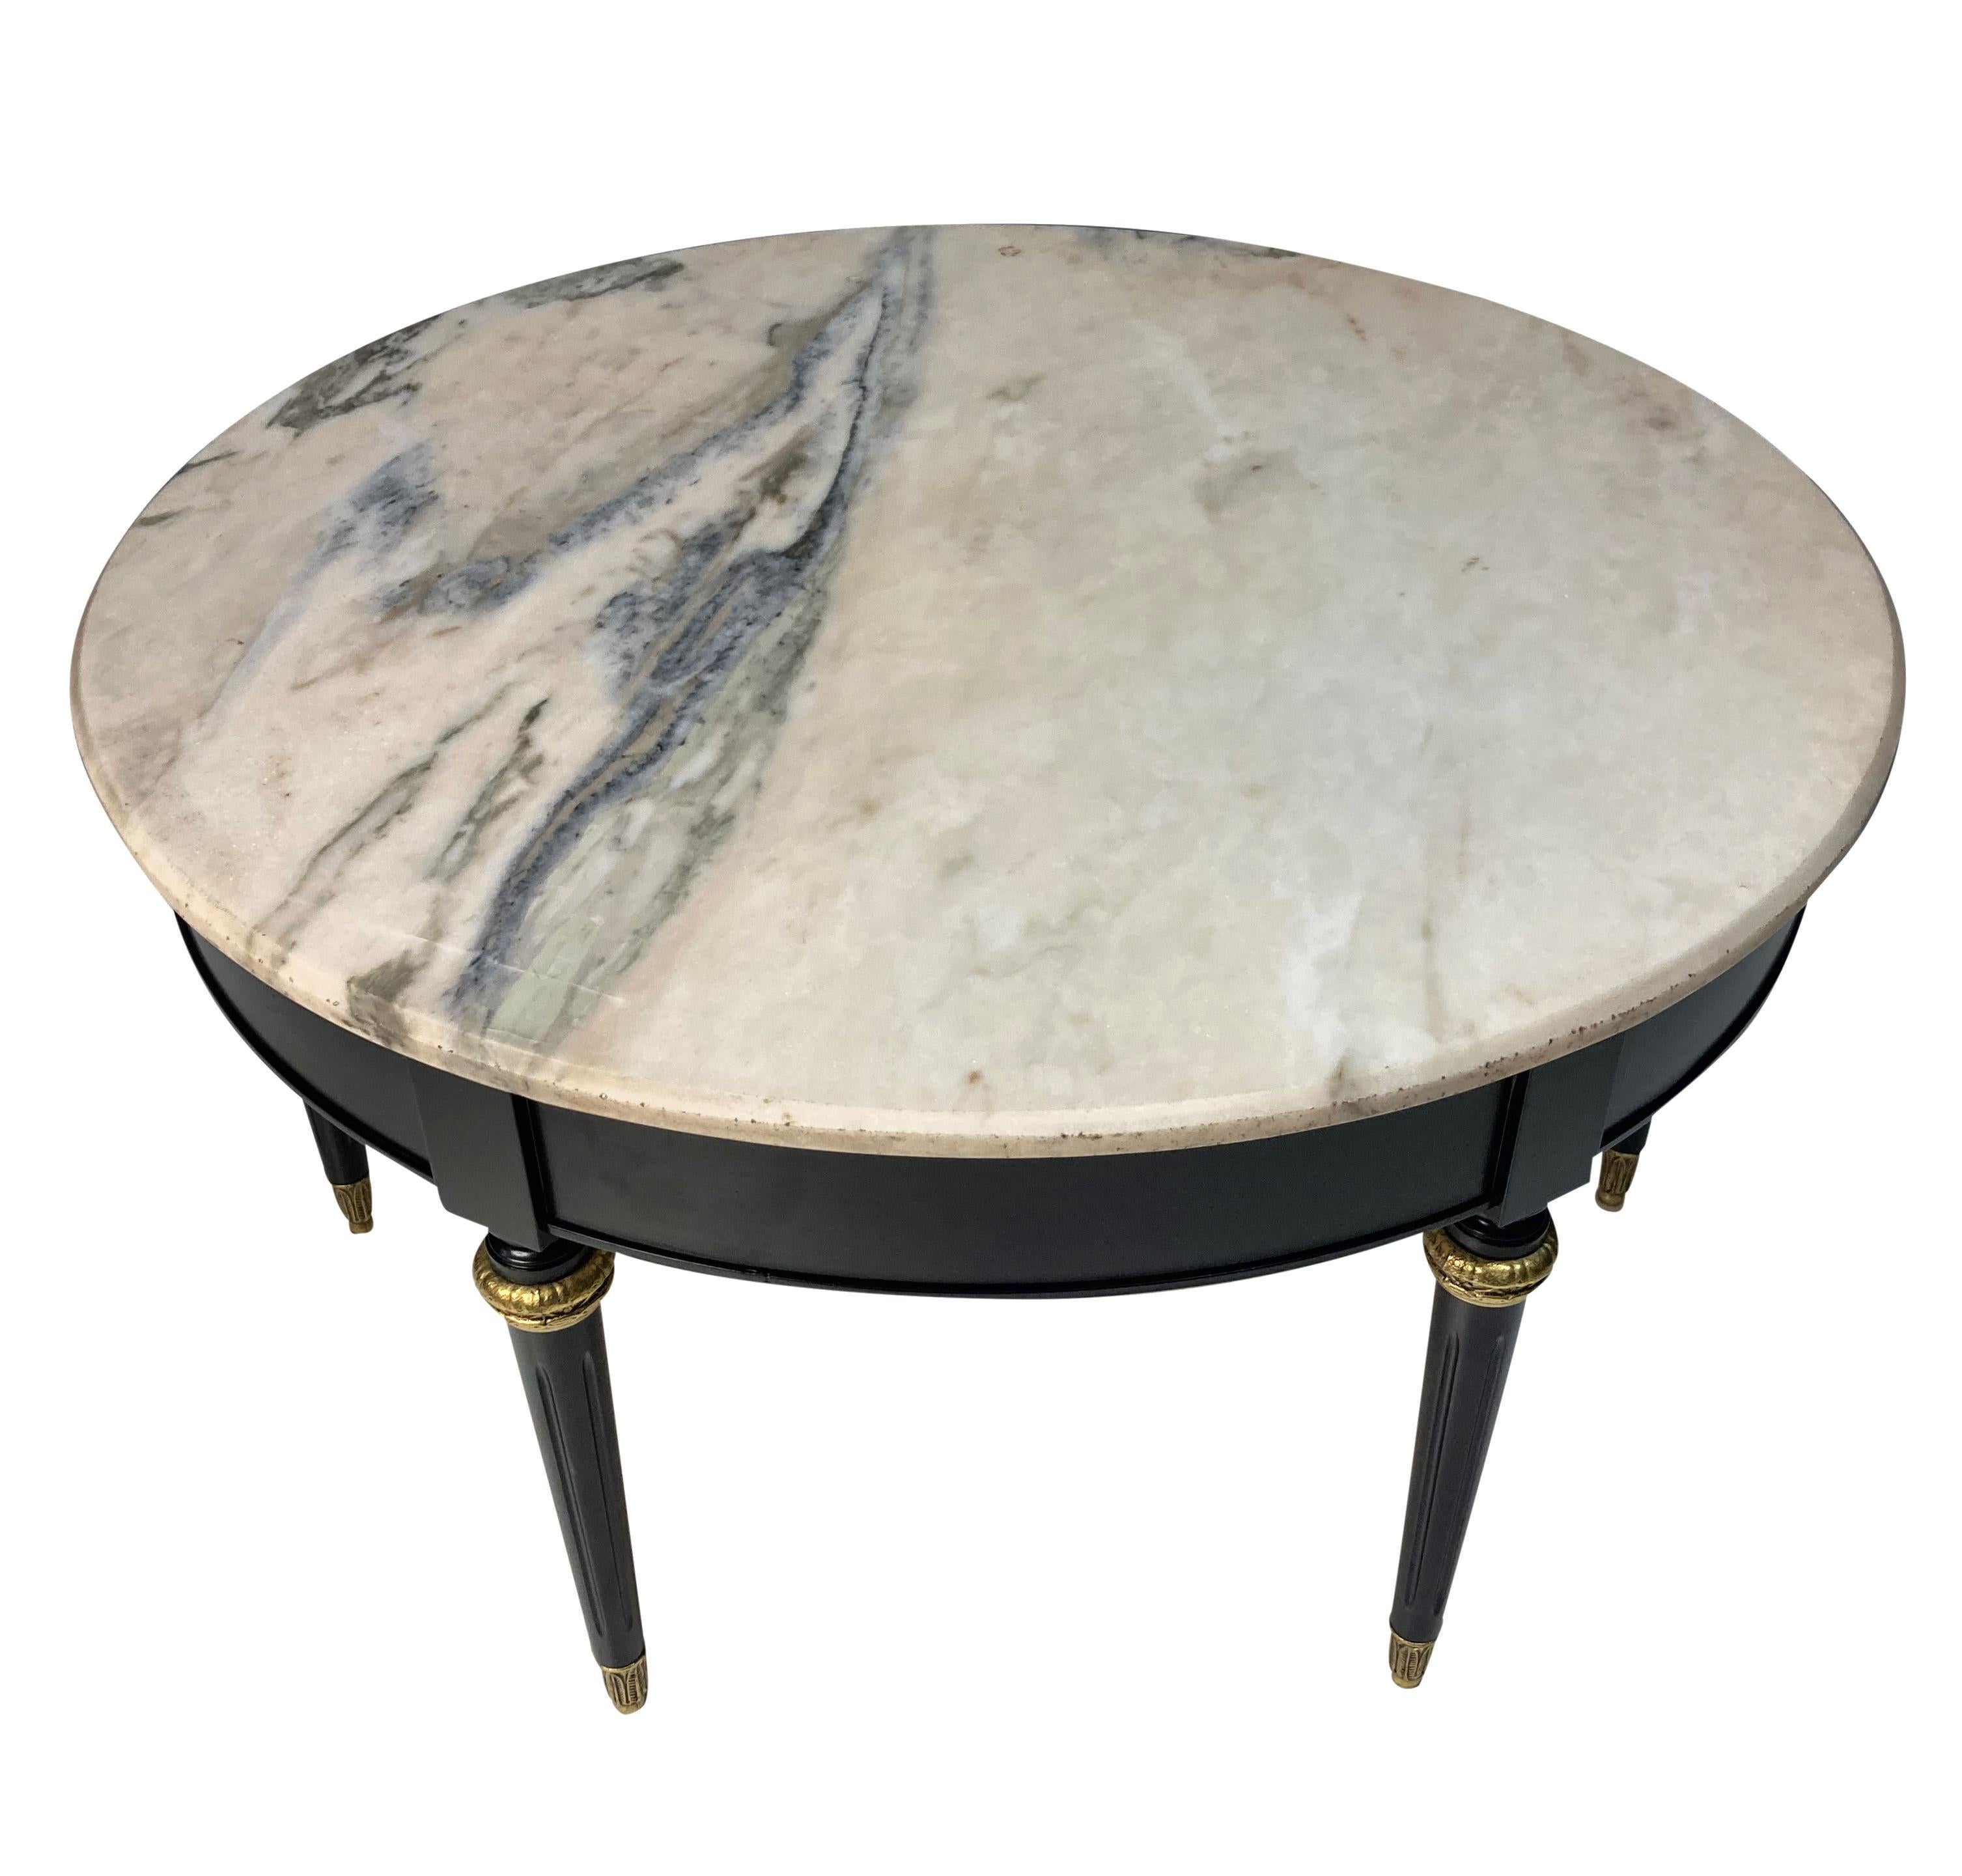 A French circular occasional table by Maison Jansen, ebonised, with six tapering fluted legs with gilt brass sabot and collars. The variegated marble top is creamy ink with a grey vein.